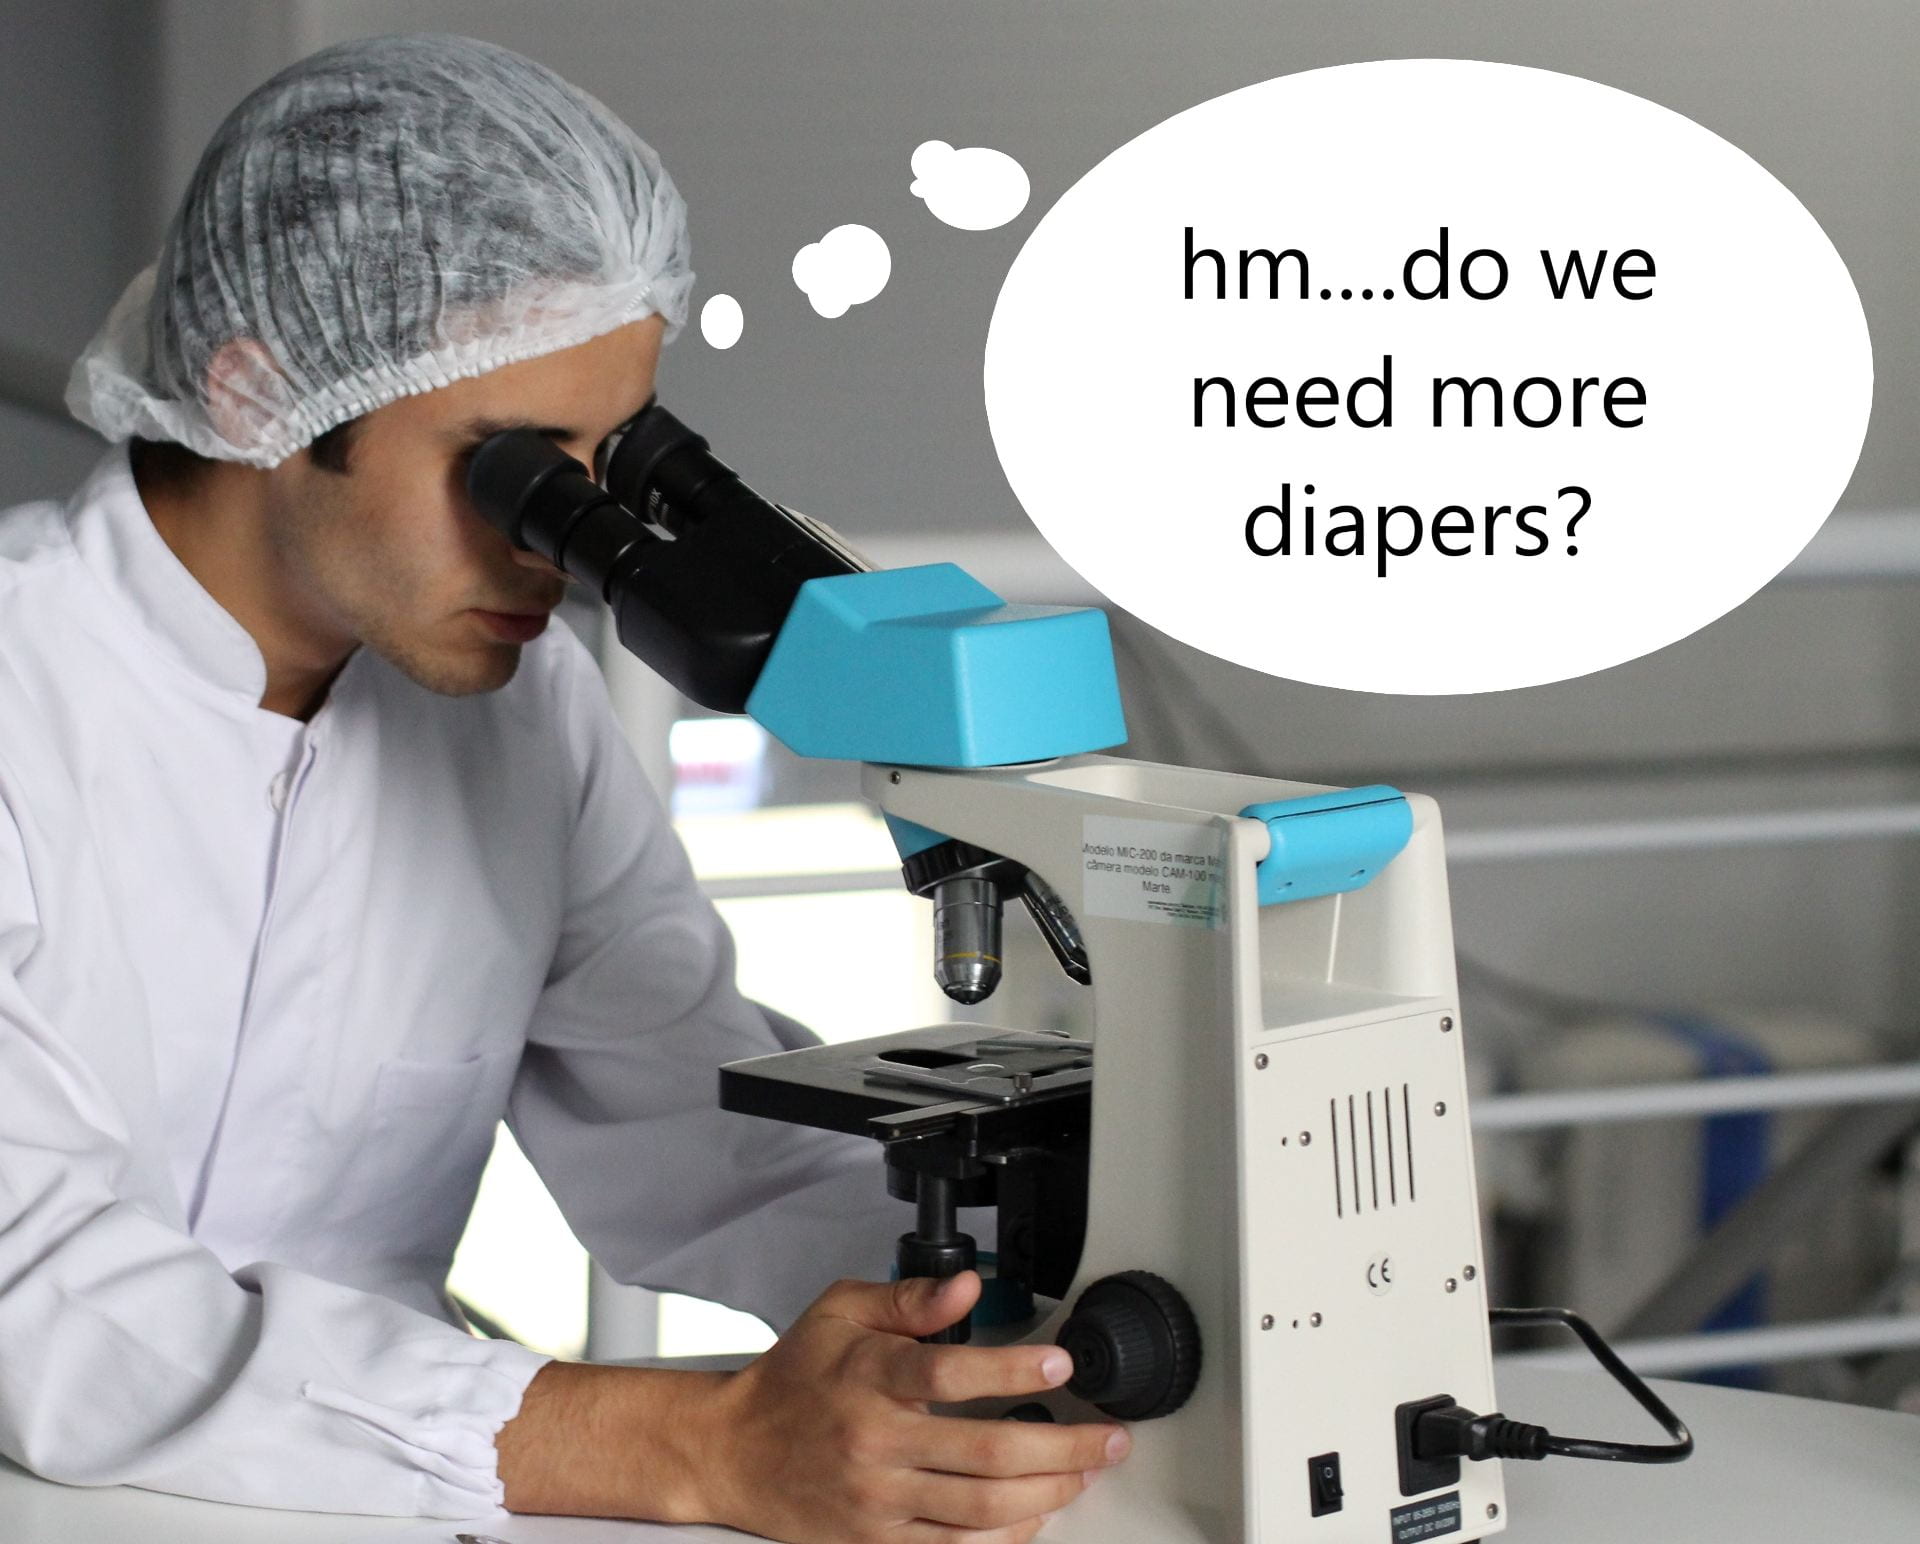  A picture of a scientist looking through a microscope and thinking ‘hm…do we need more diapers?’